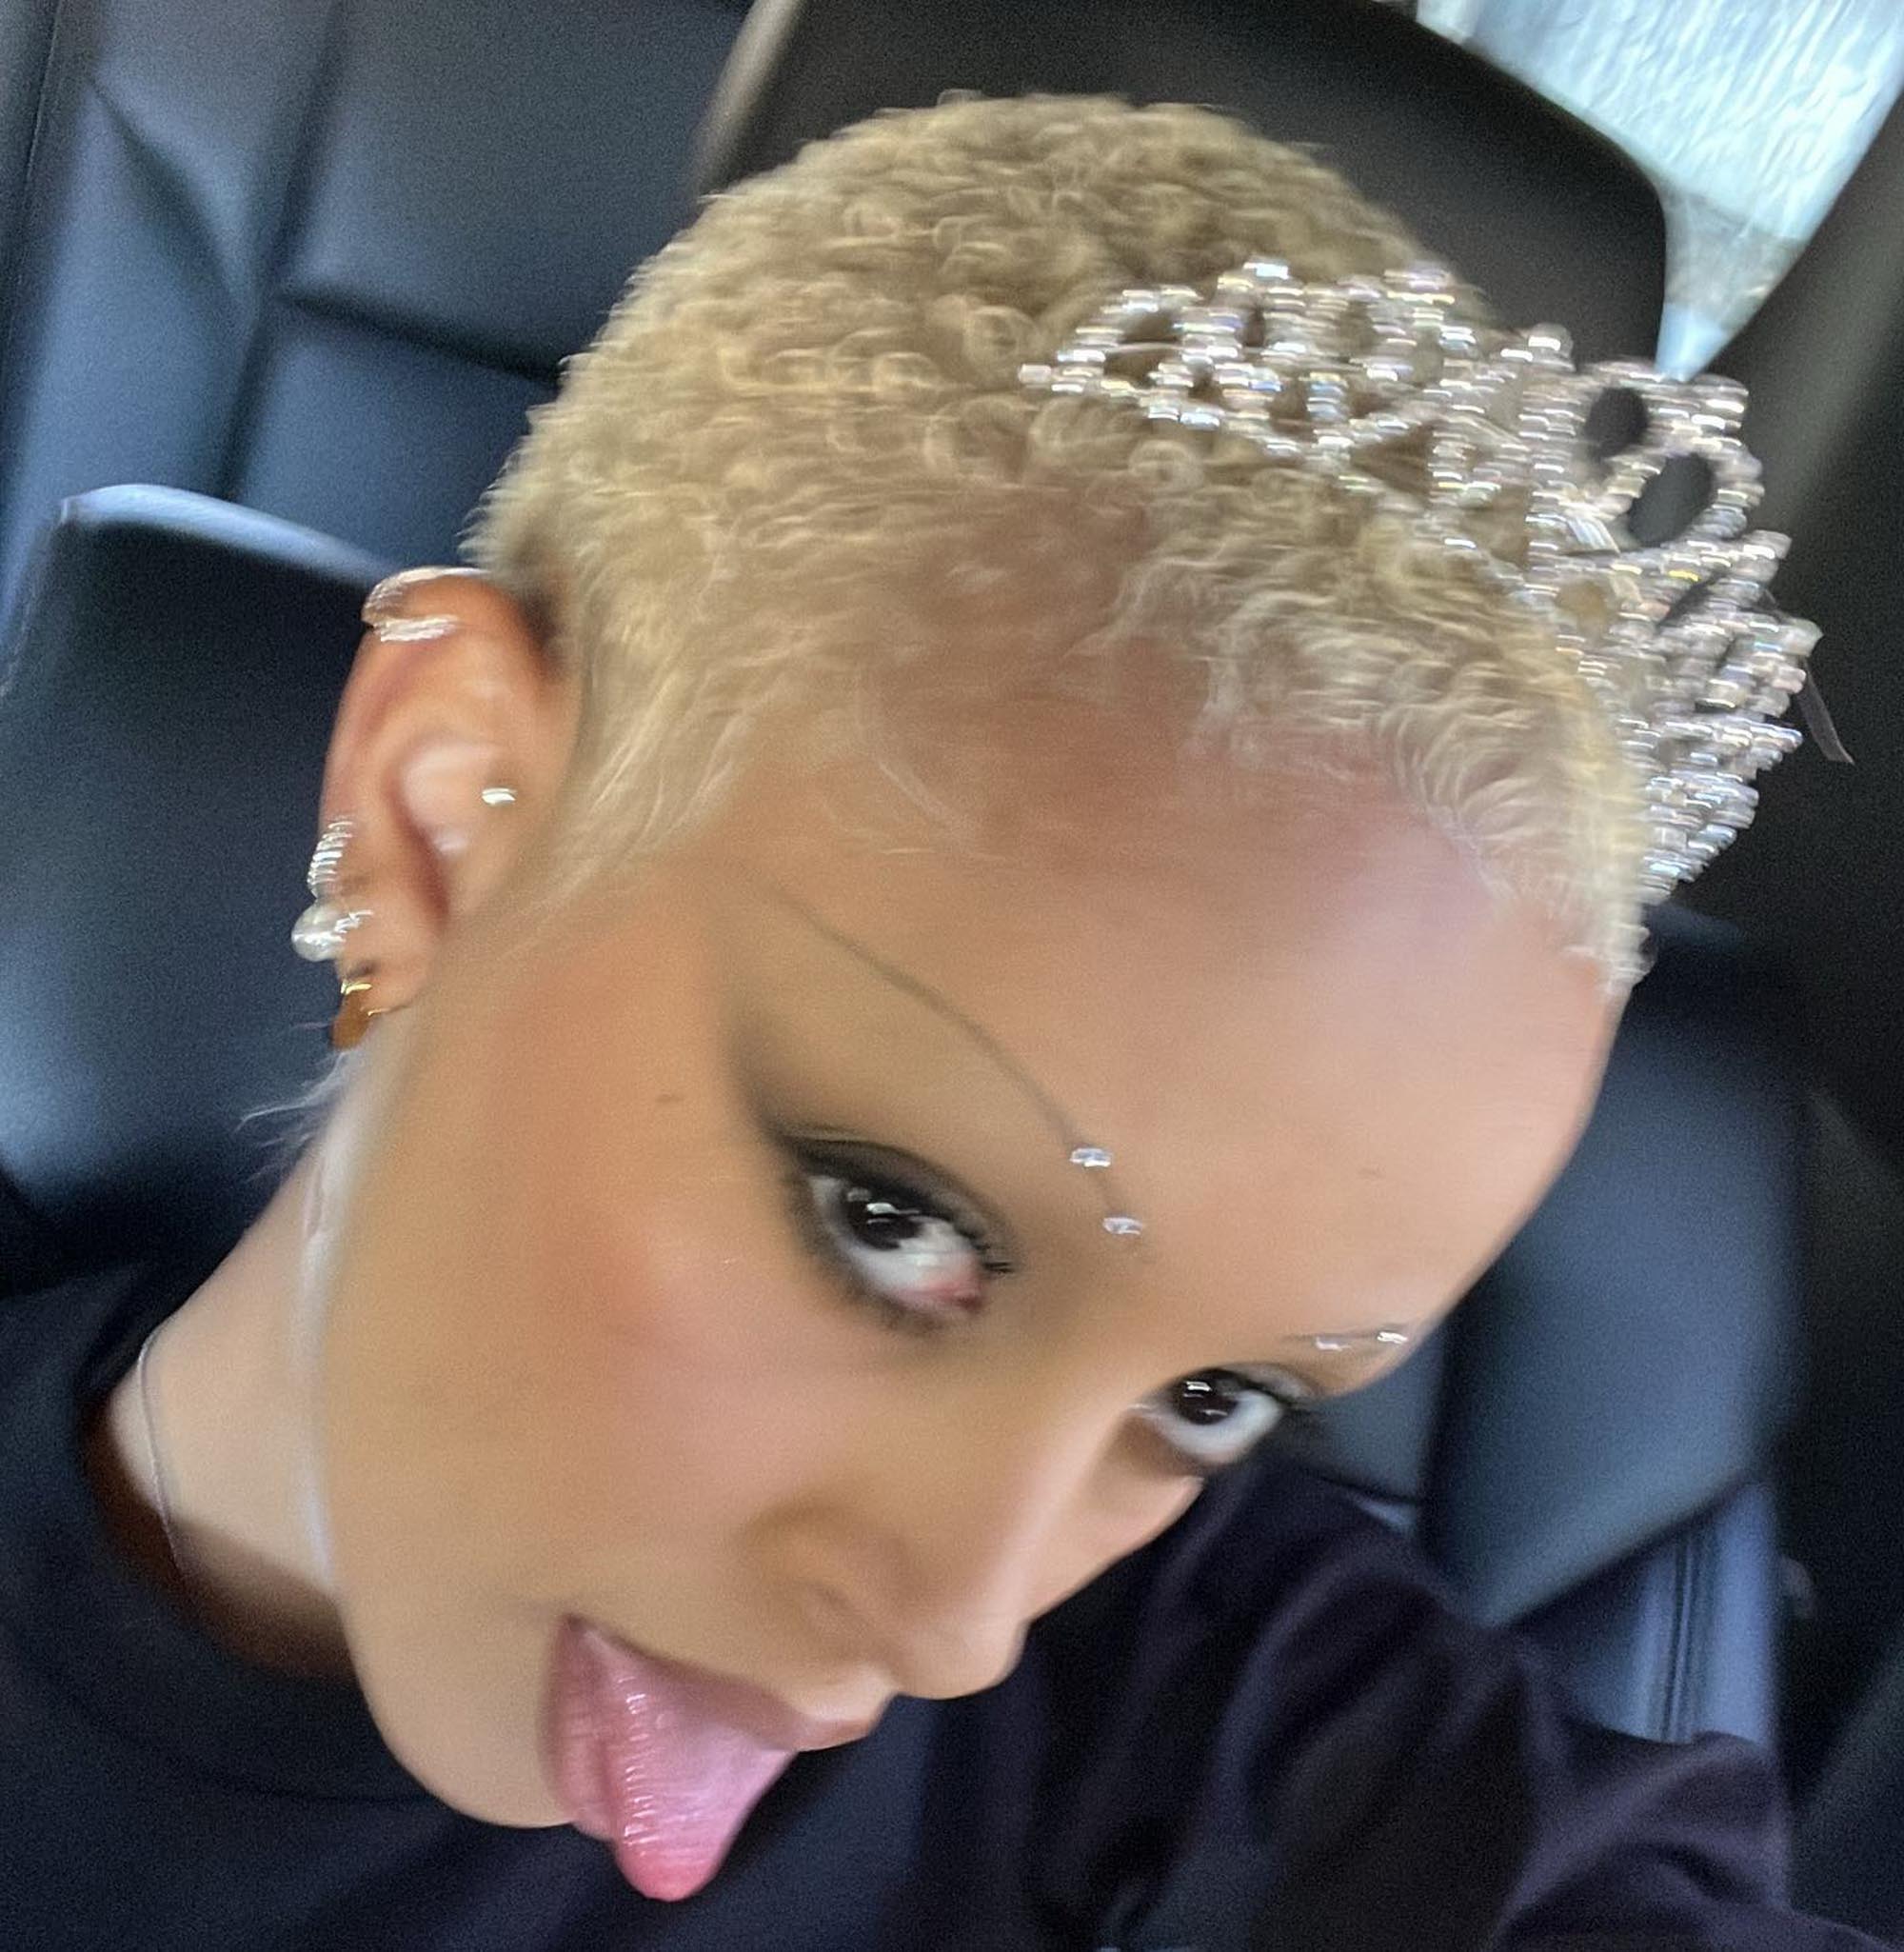 A selfie of Doja Cat with her tongue out.